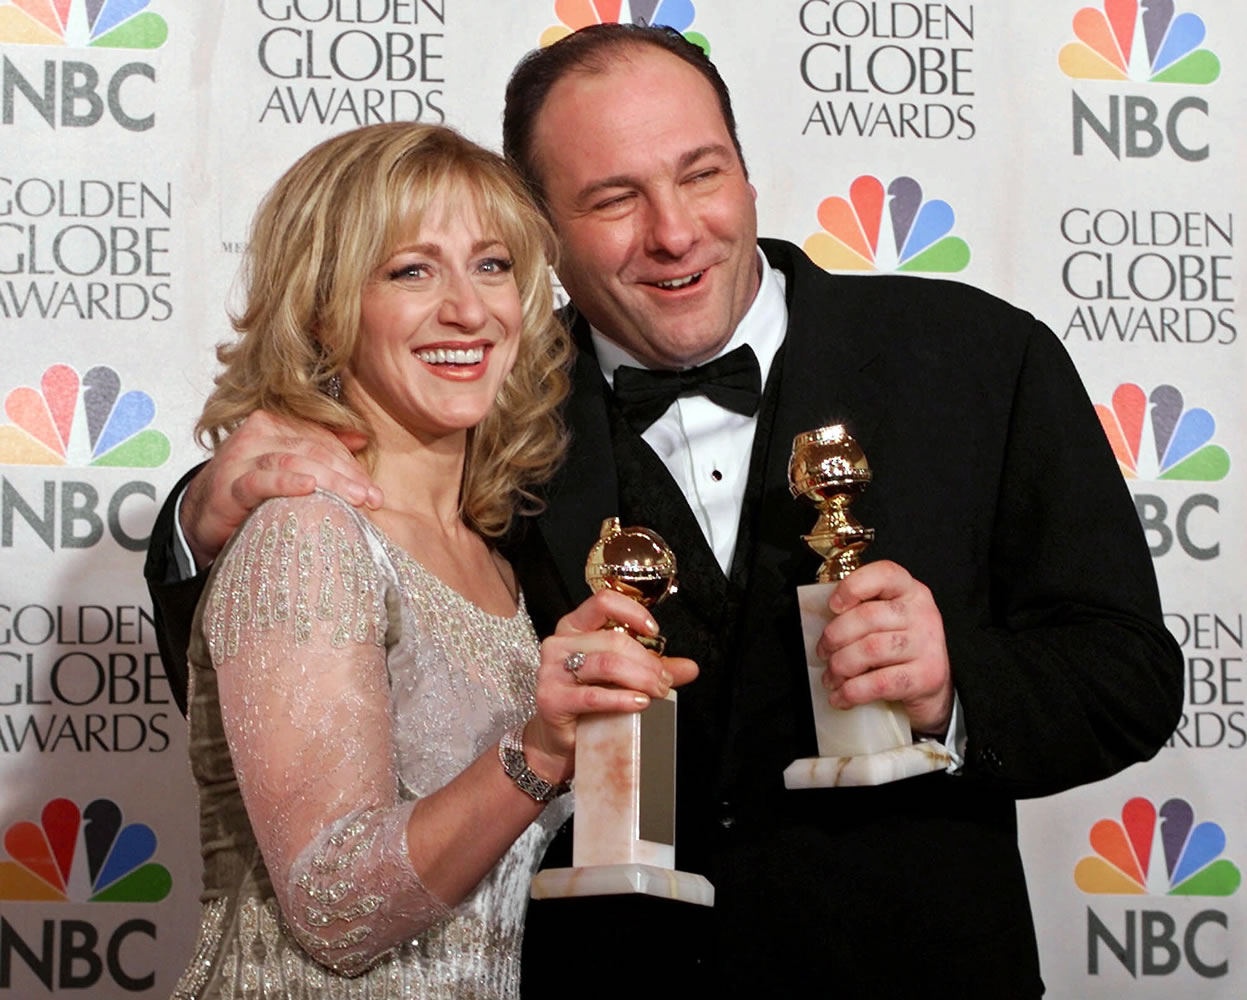 Actors Edie Falco, left, and James Gandolfini with their awards for best performance by an actress and actor in a dramatic televison series for &quot;The Sopranos,&quot; during the 57th Golden Globe Awards in Beverly Hills, Calif., on Jan. 23, 2000. HBO and the managers for Gandolfini say the actor died Wednesday in Italy.